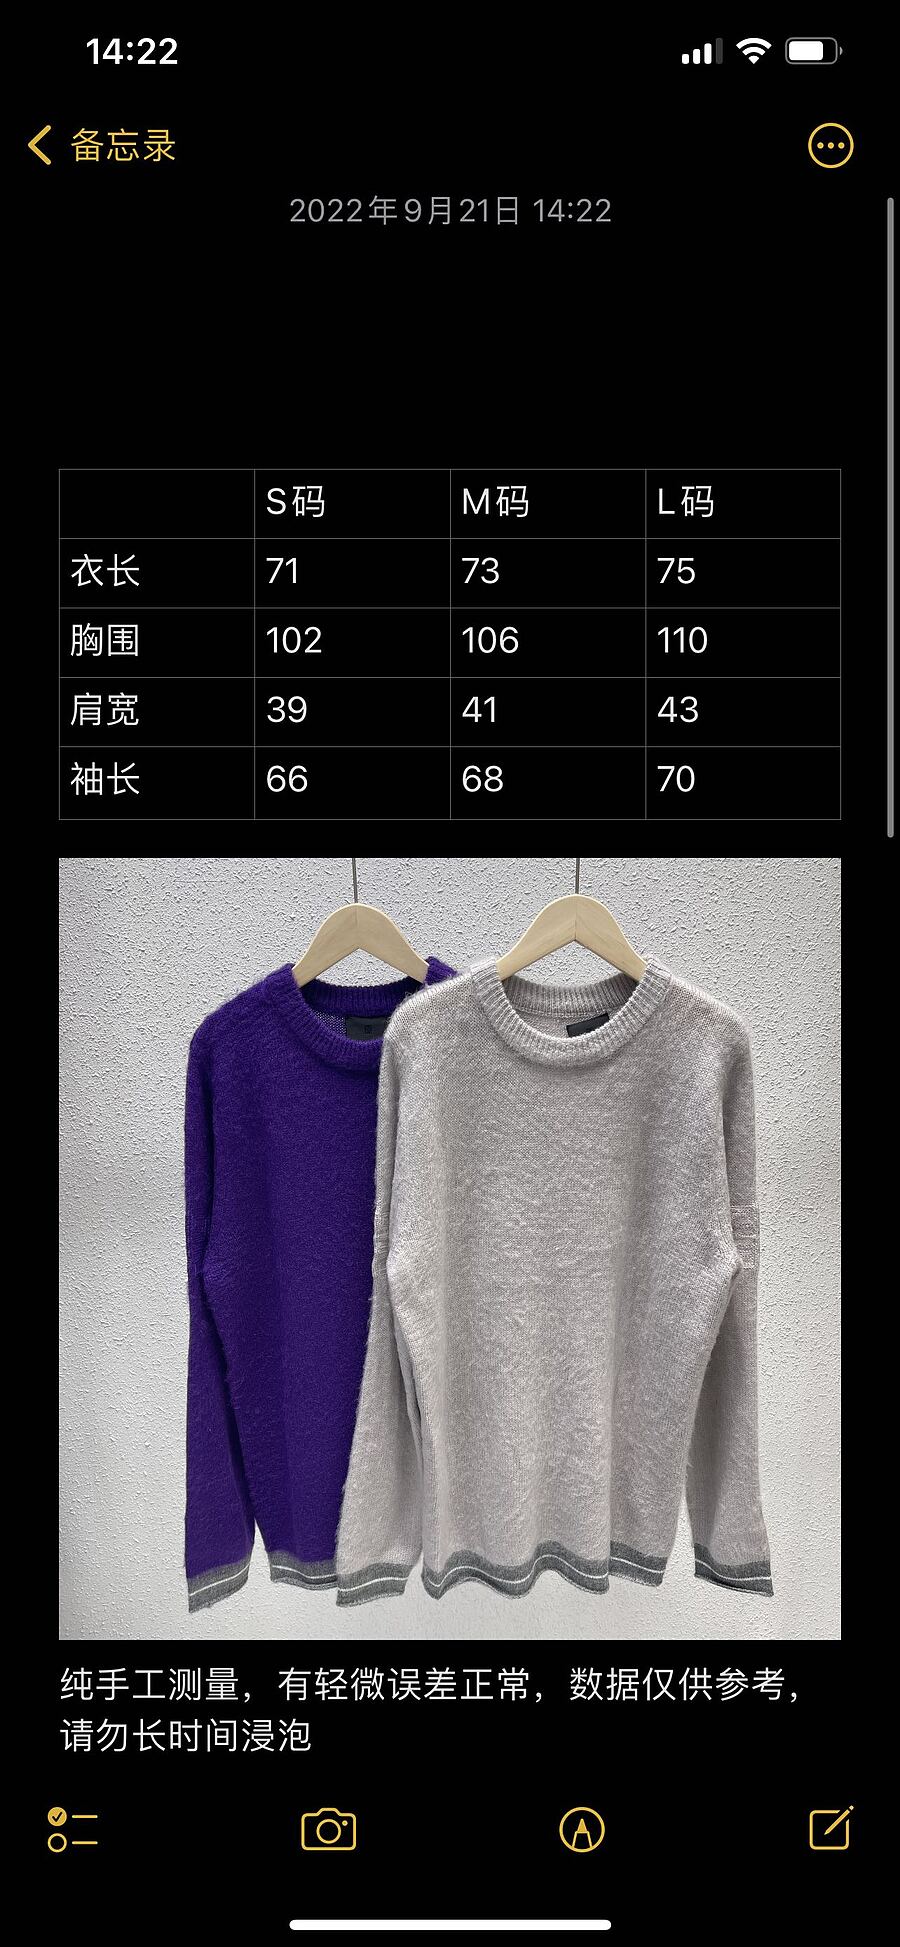 Givenchy Sweaters for Women #539898 replica